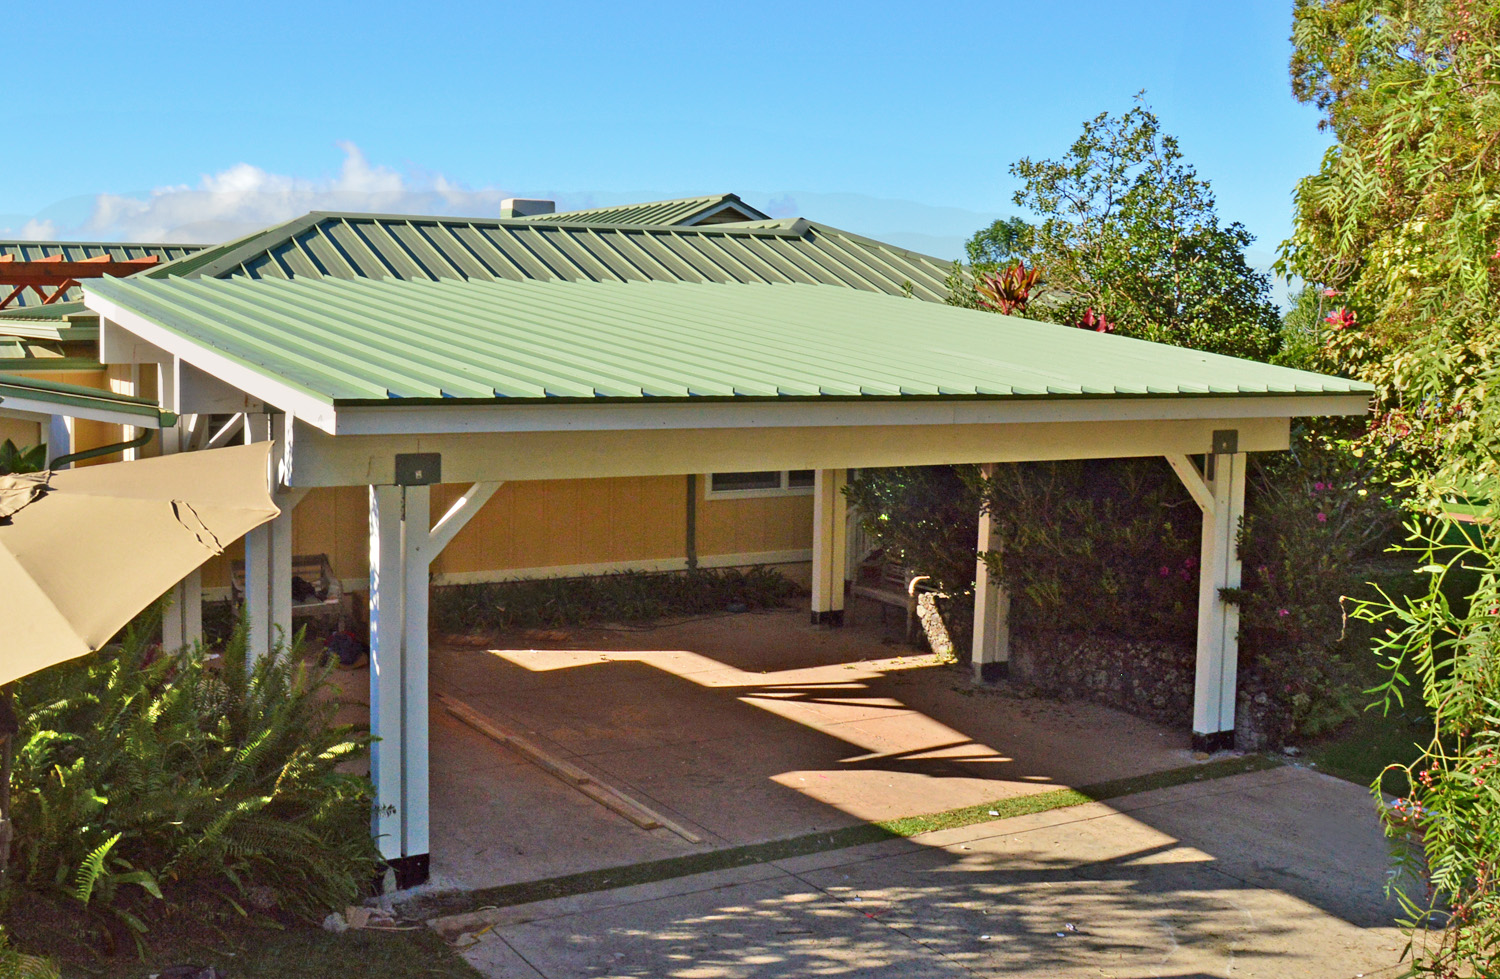 The roofing of this Carport Pavilion was selected to match the existing roofing of the home.